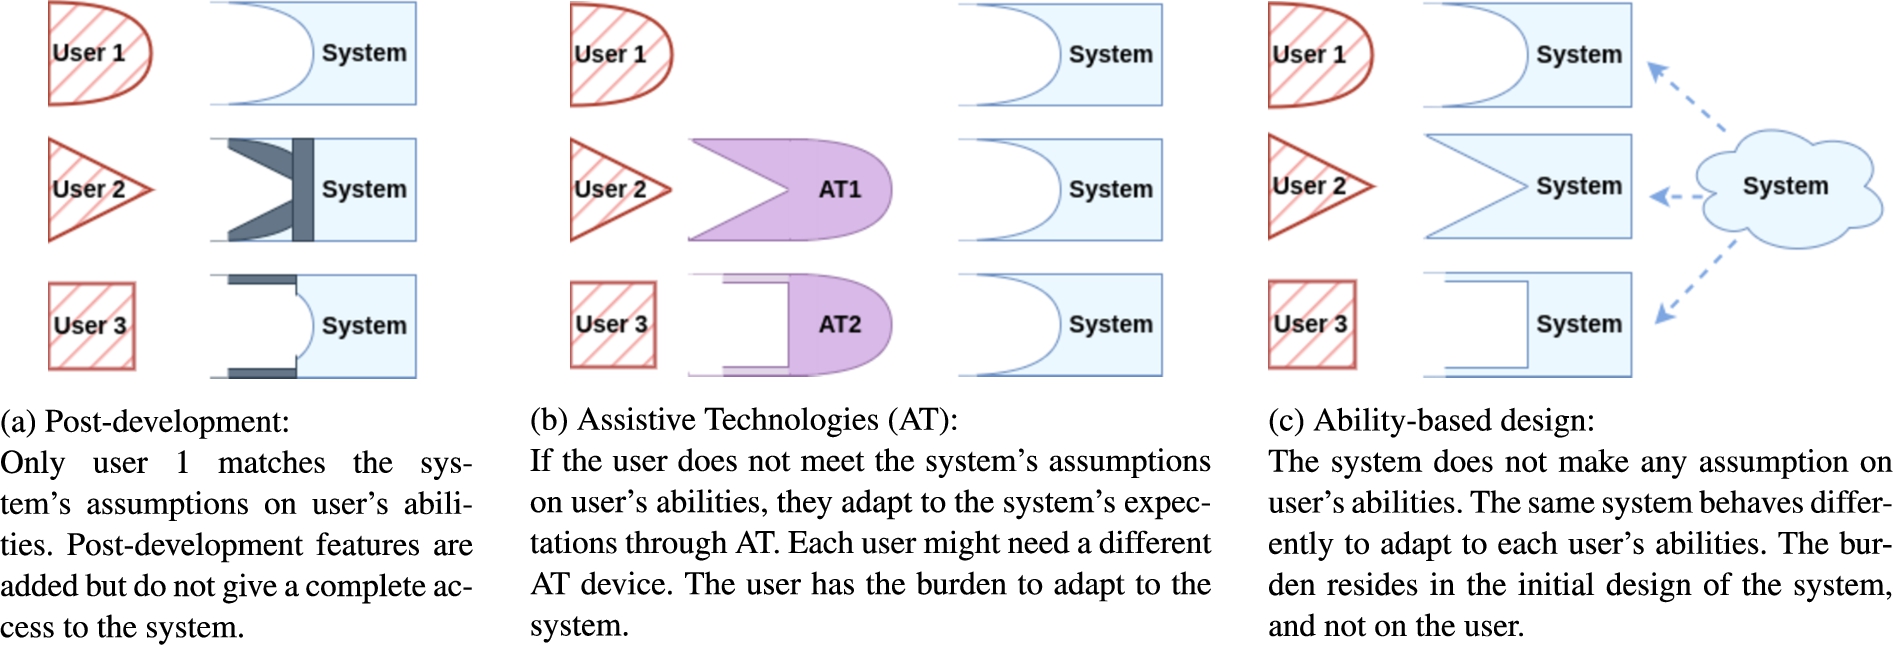 Three different approaches for accessibility in a system: (a) post-development accessibility features, (b) adaptations from the user to align with the system requirements via Assistive Technologies (AT), and (c) ability-based design. All users can have various sensory abilities. In this figure, we represent different sensory abilities through shapes, with three users.